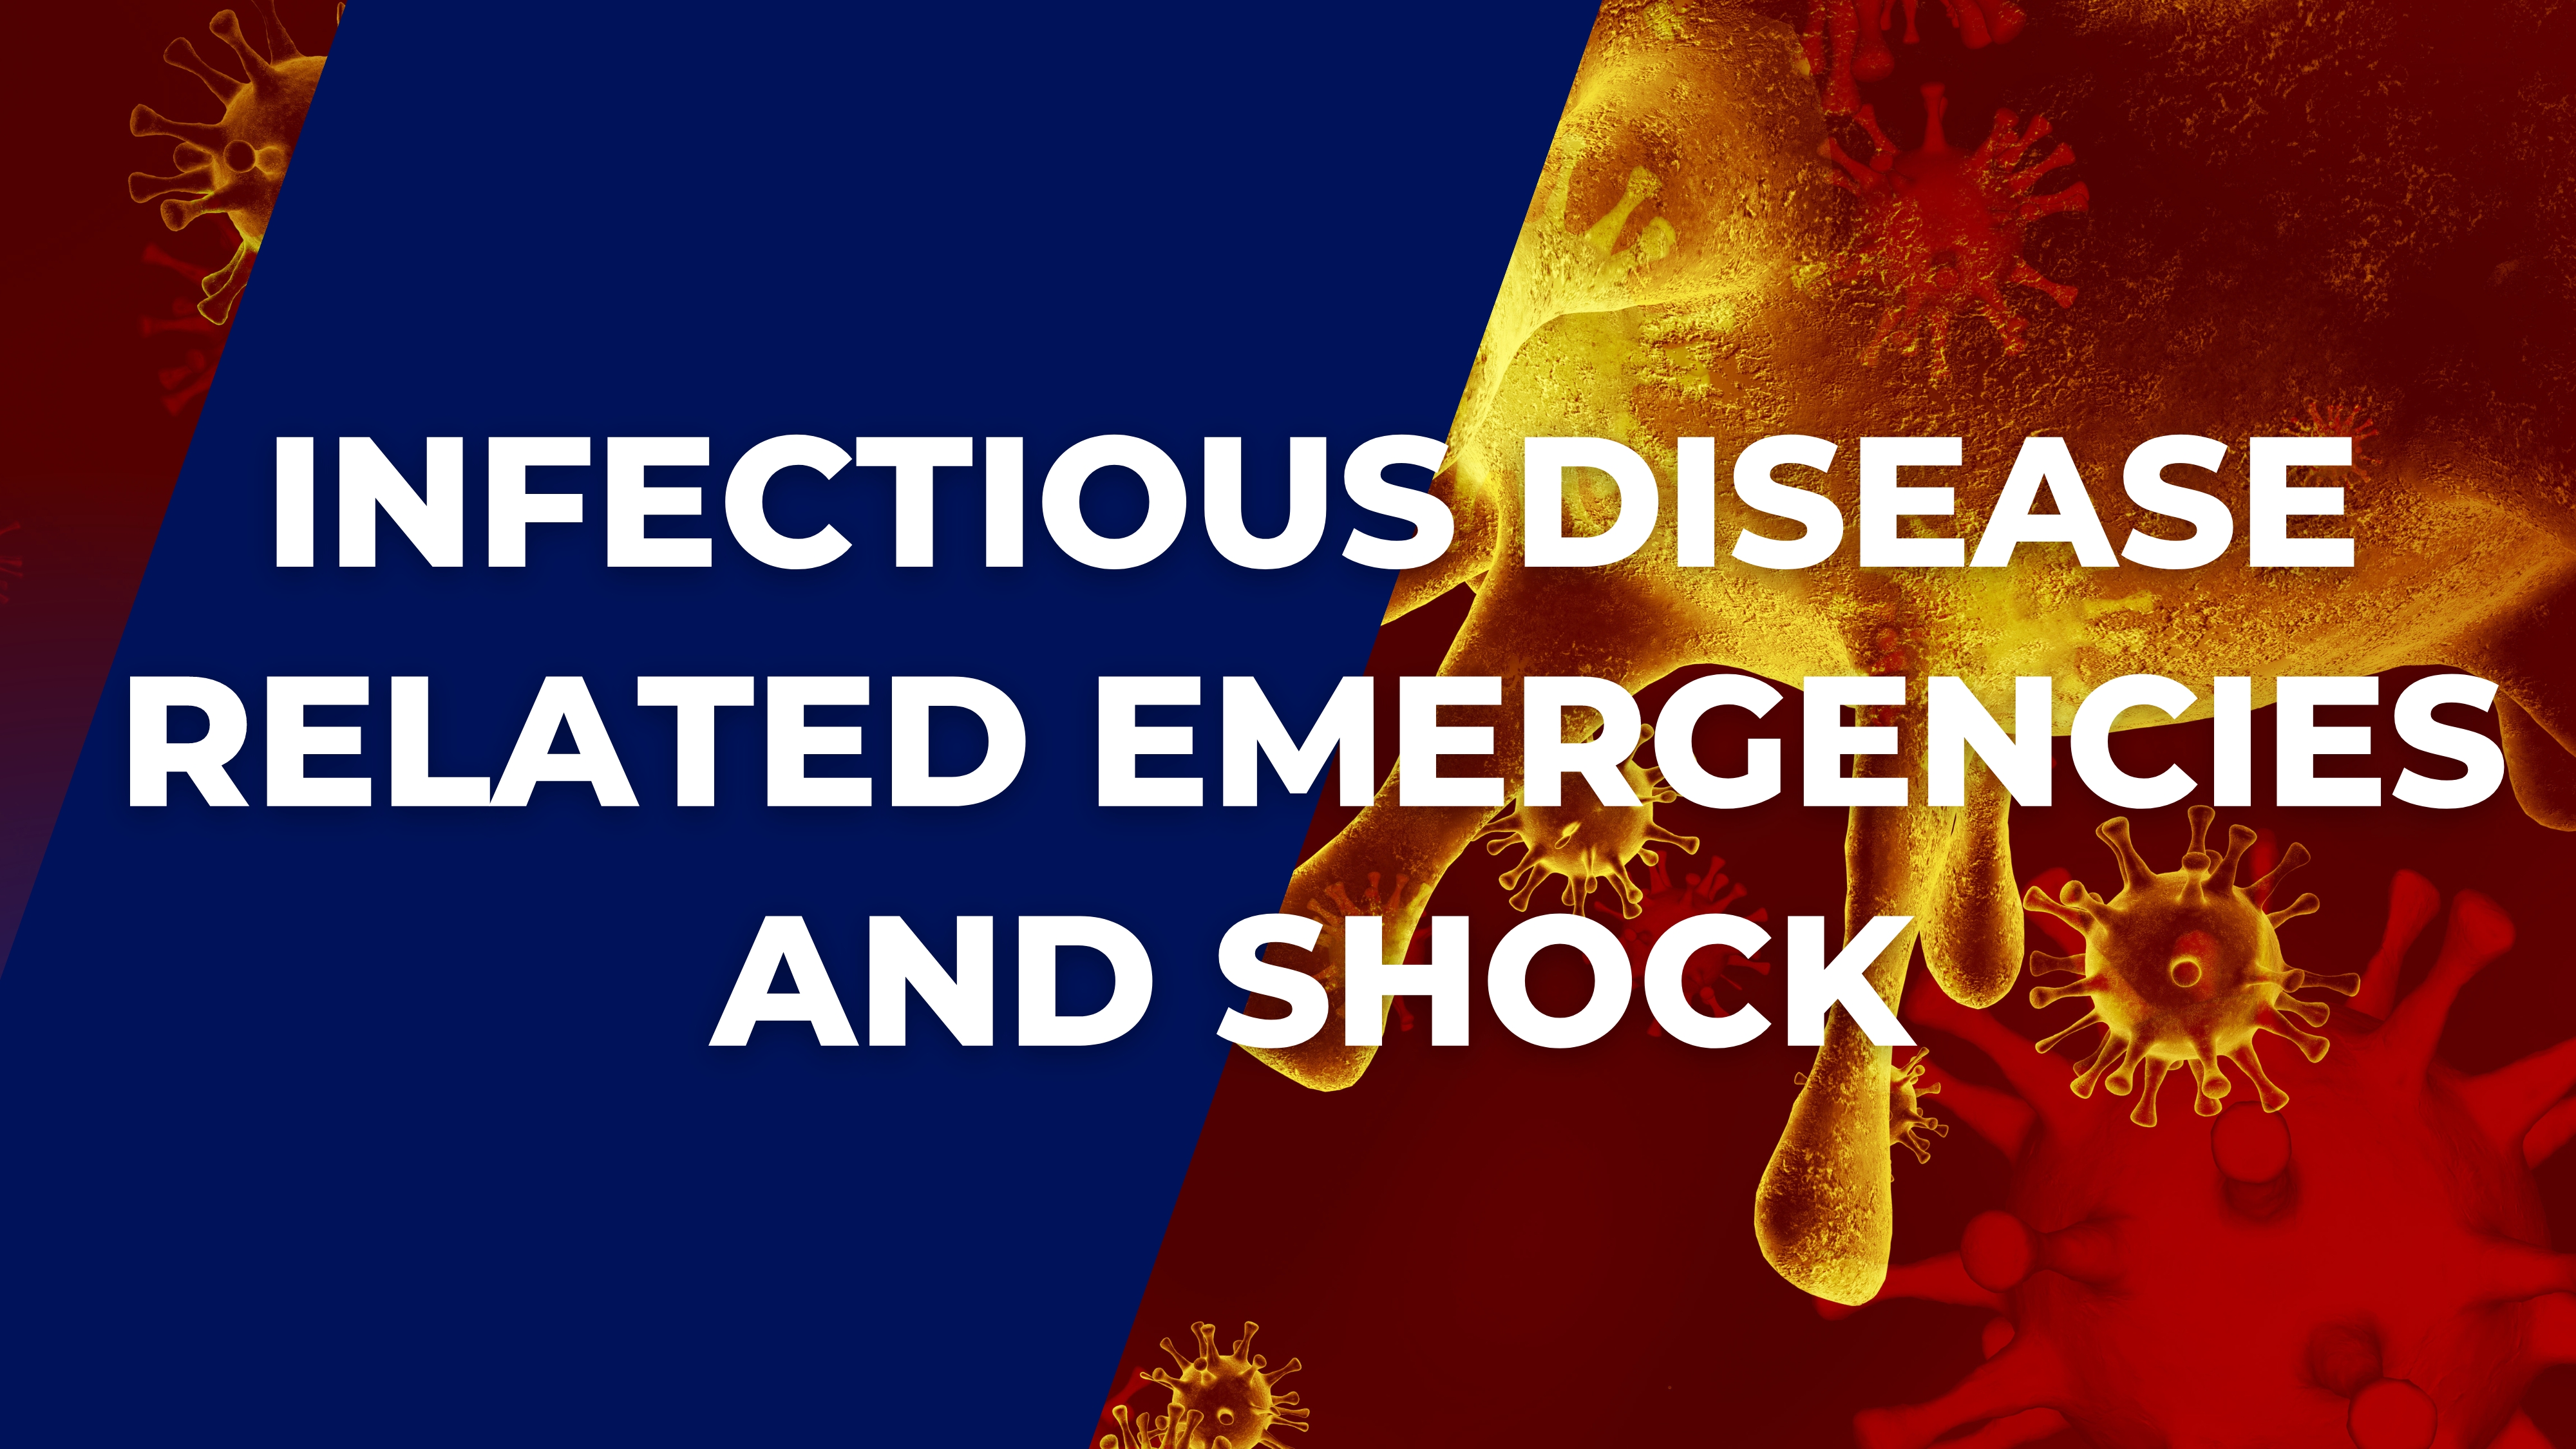 Infectious disease related emergencies and shock